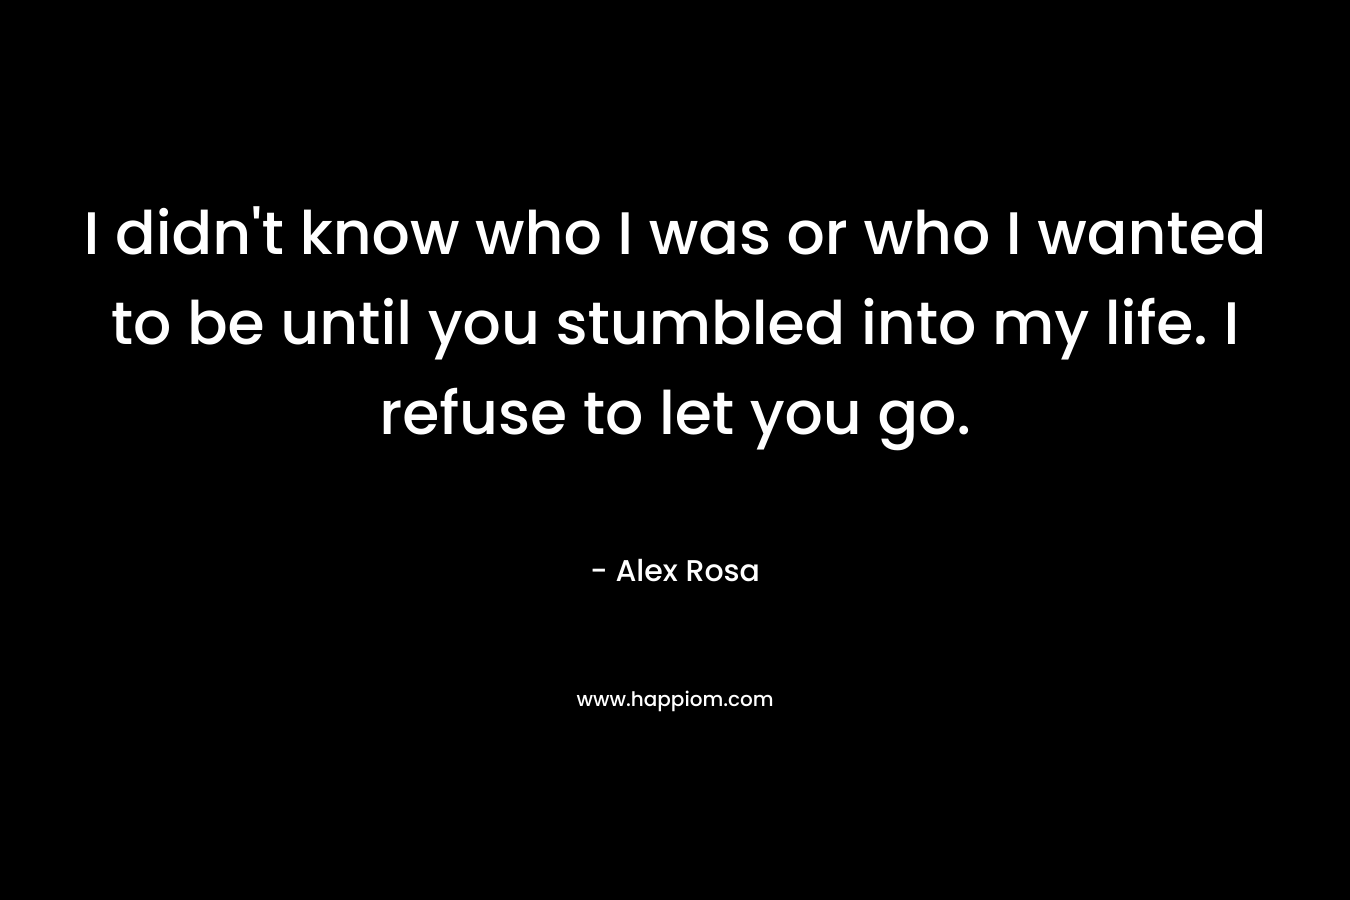 I didn’t know who I was or who I wanted to be until you stumbled into my life. I refuse to let you go. – Alex Rosa